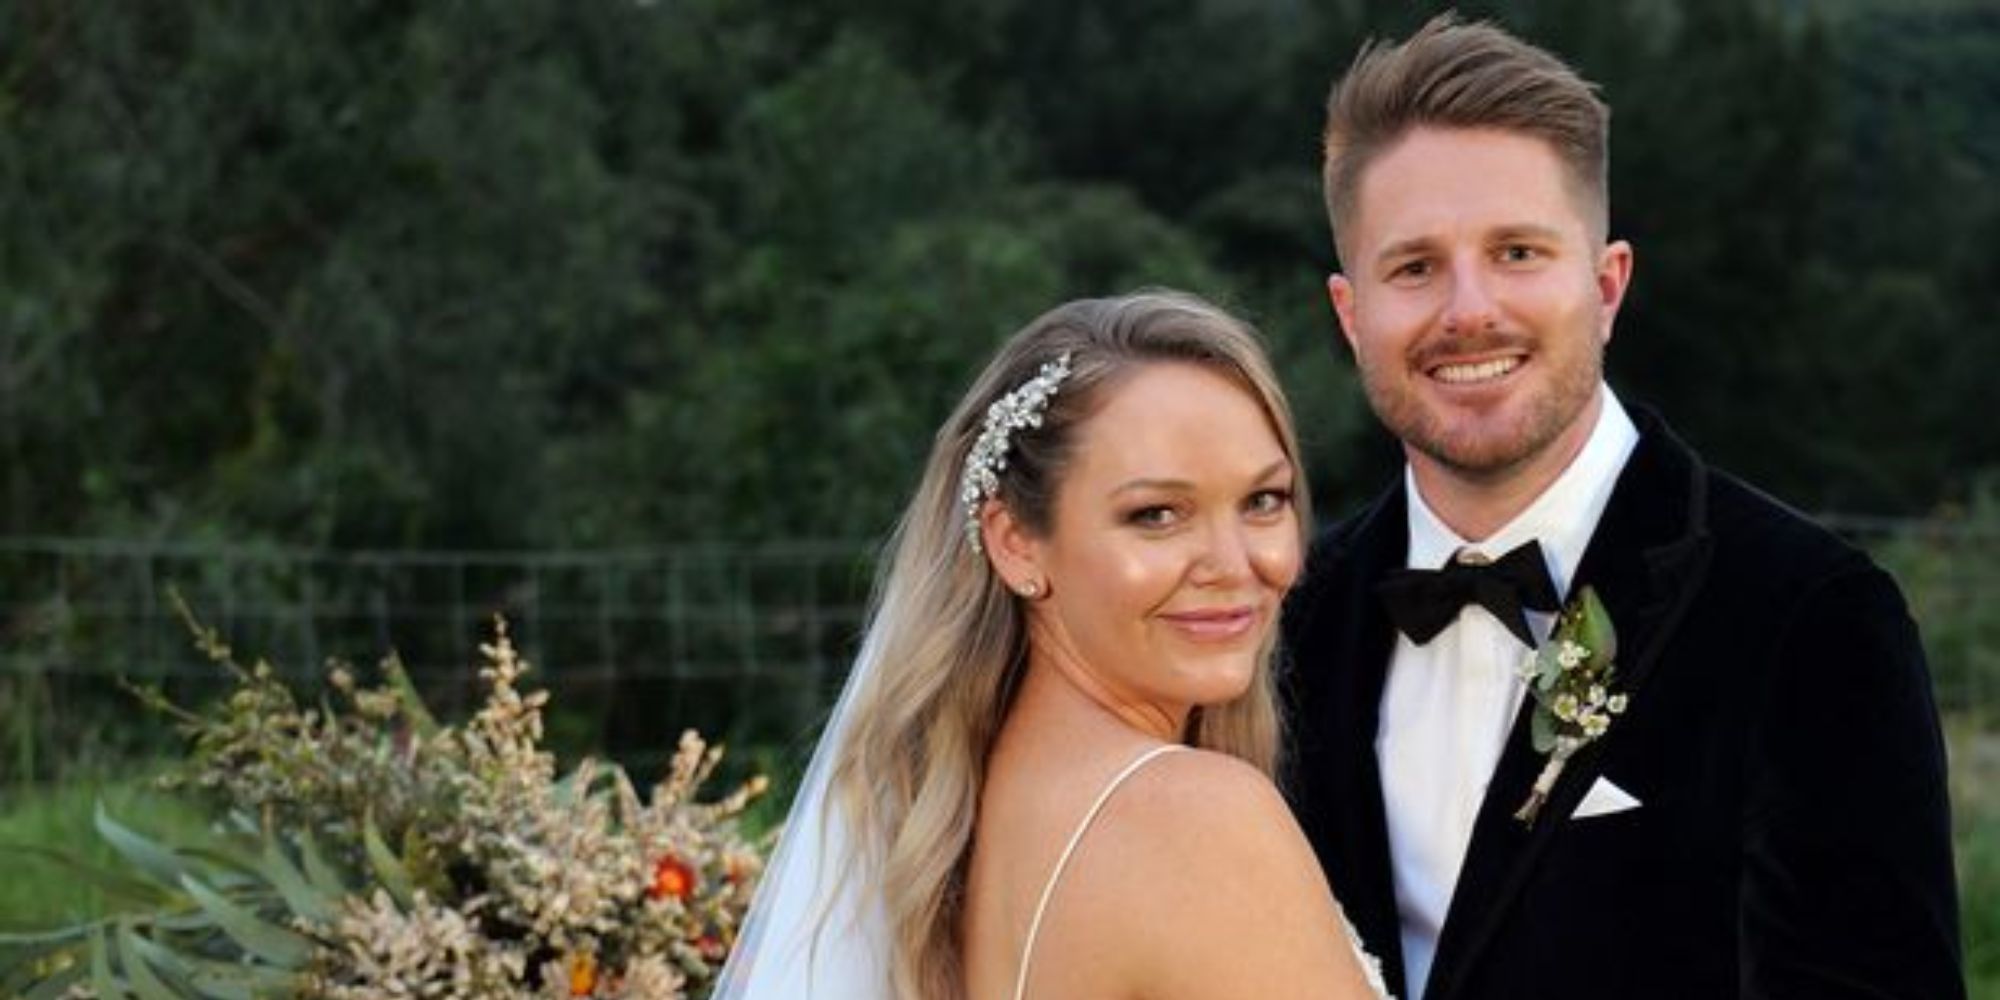 Mel and Bryce's Wedding Day from Married At First Sight